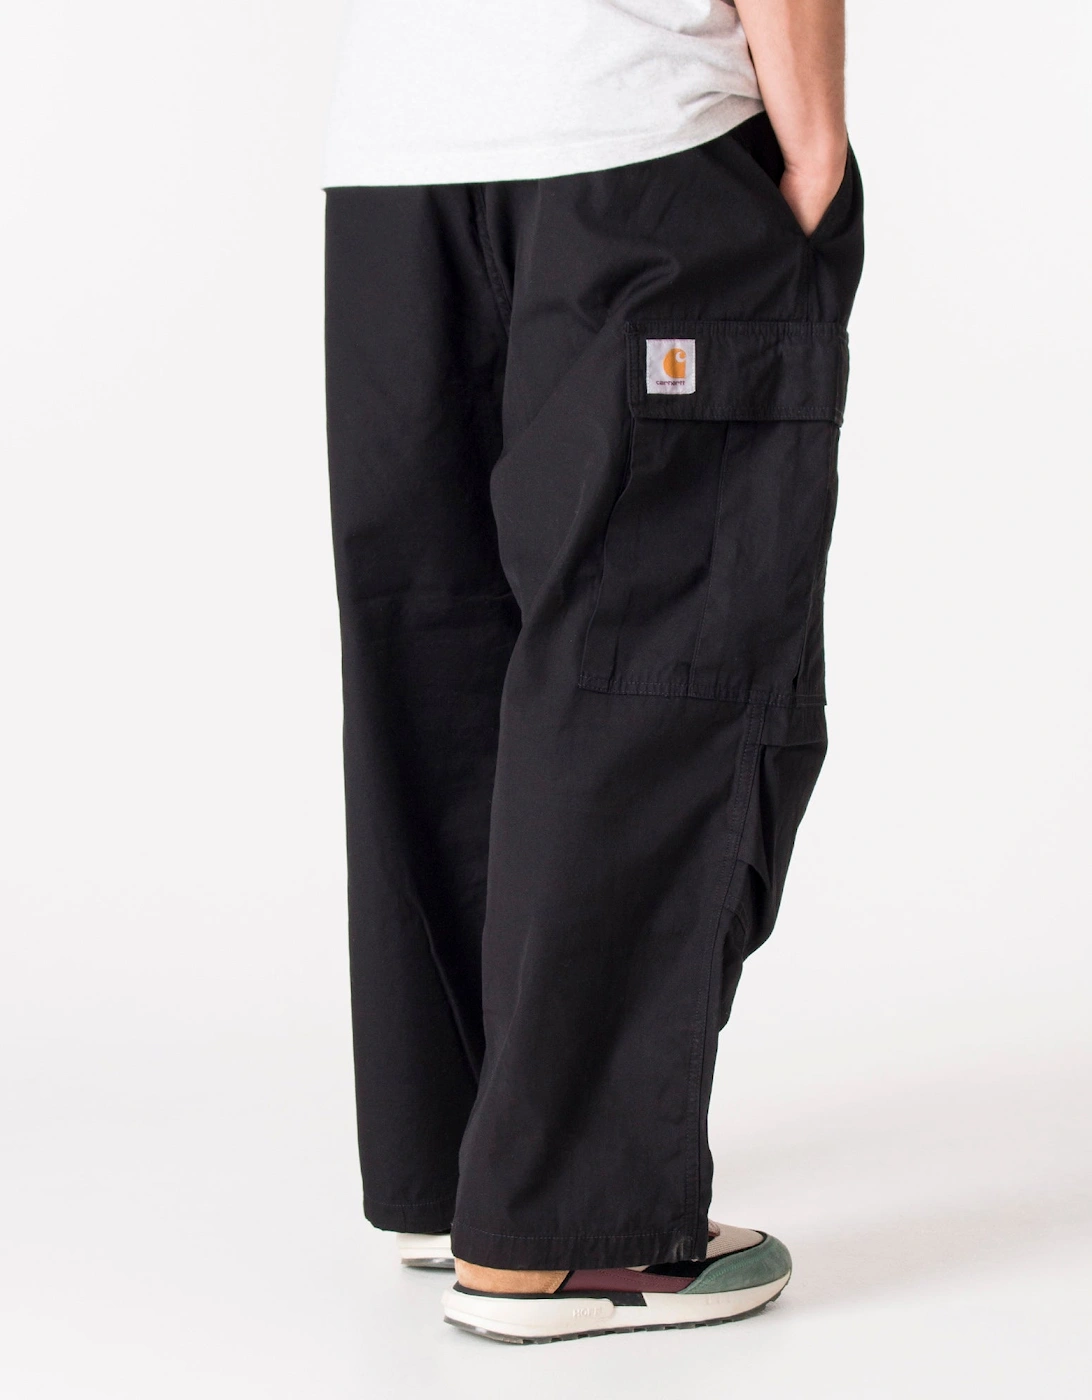 Relaxed Fit Jet Cargo Pants